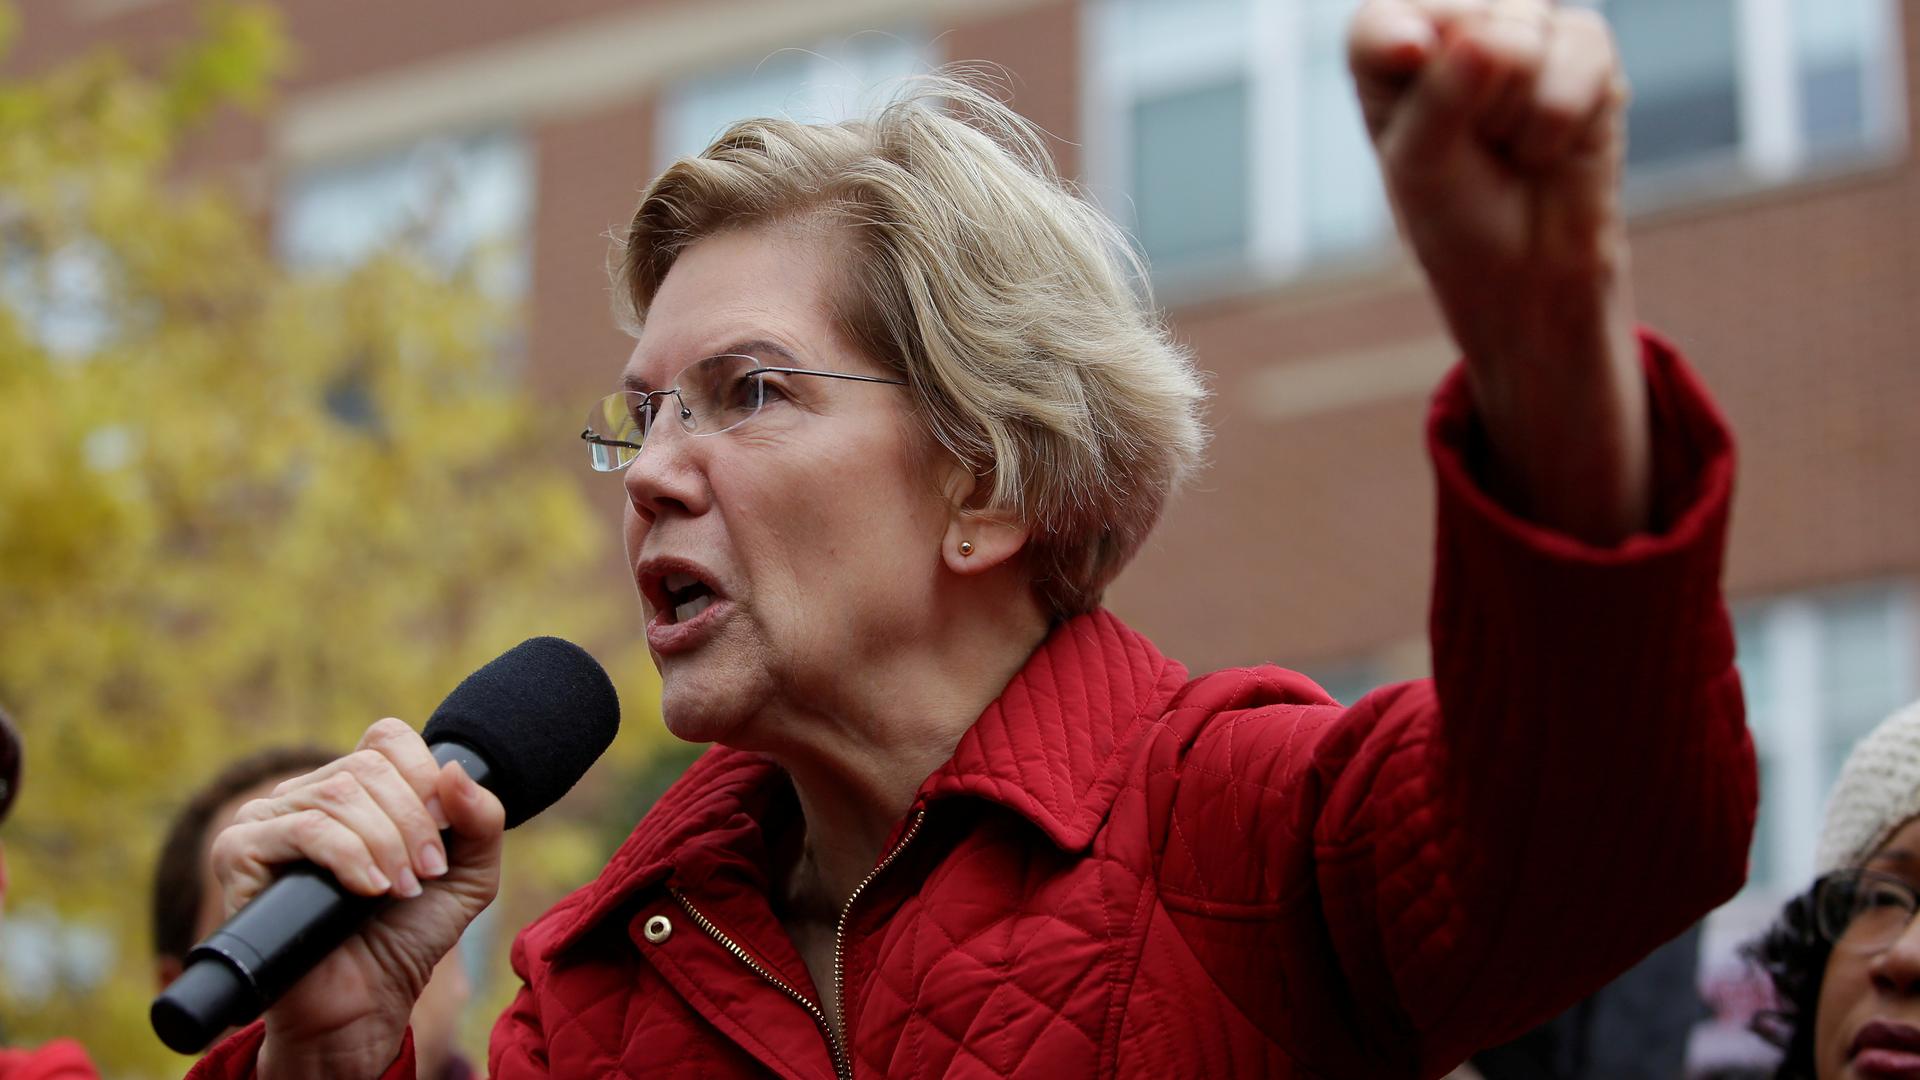 Elizabeth Warren wears a red blazer and speaks with one hand in the air.